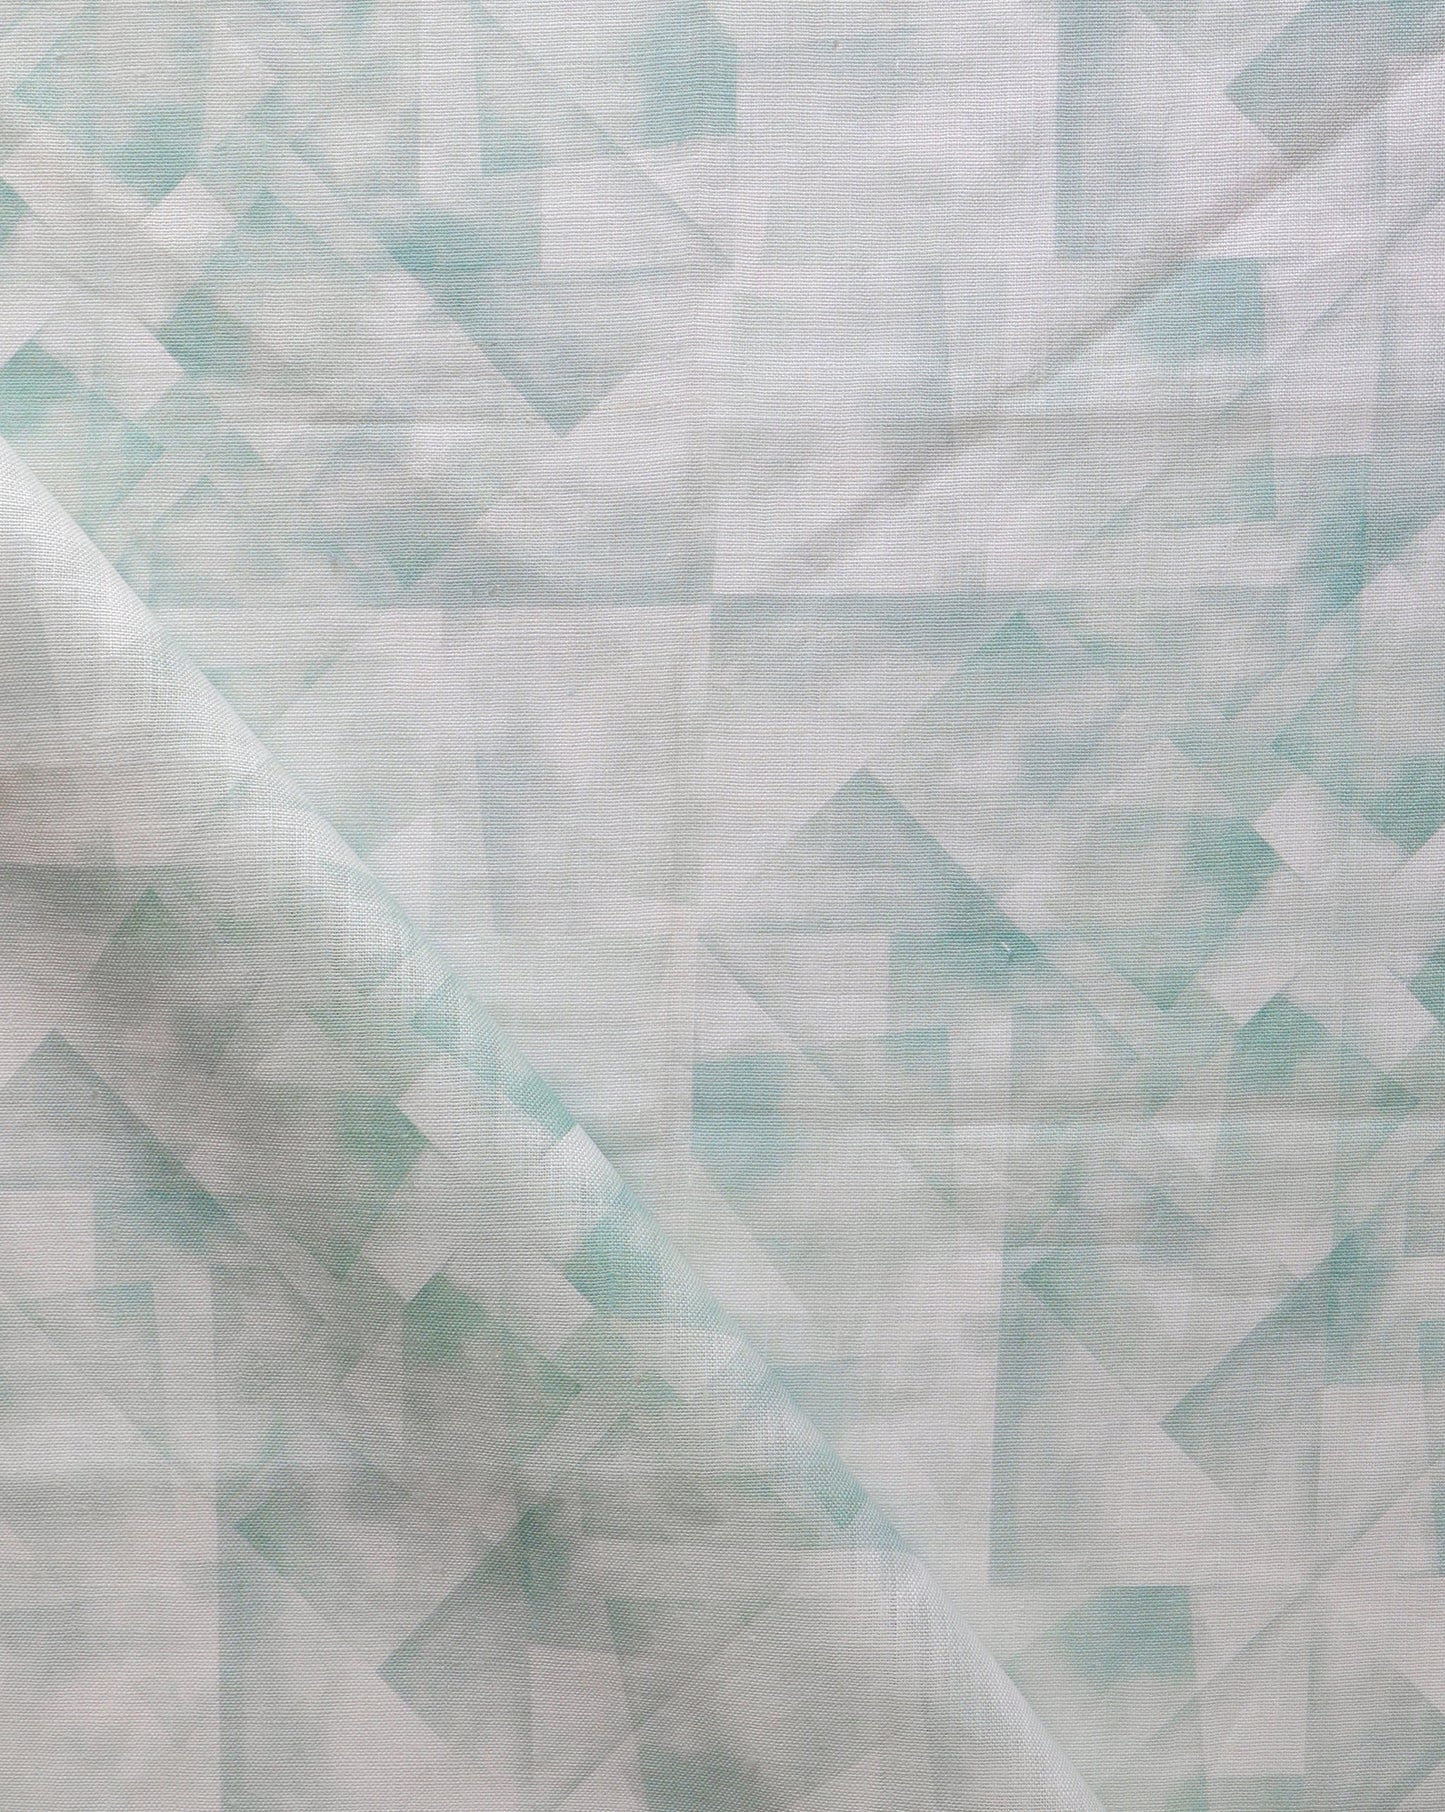 A close up of a green and white quilted Kalos Fabric||Sage kaleidoscope style collage fabric.